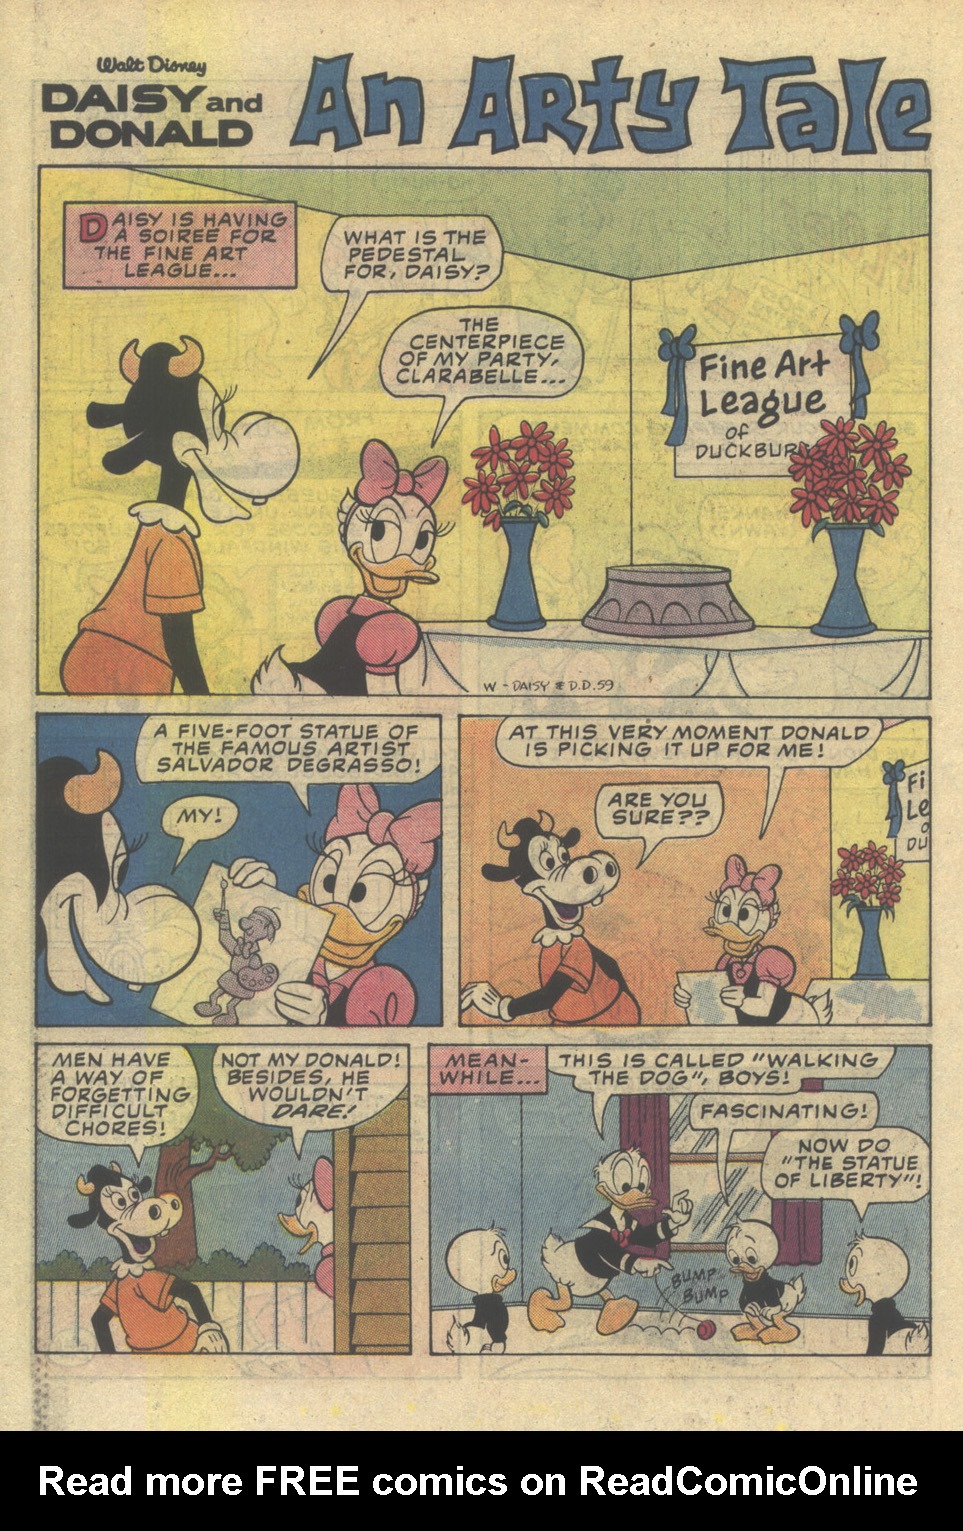 Read online Walt Disney Daisy and Donald comic -  Issue #59 - 23